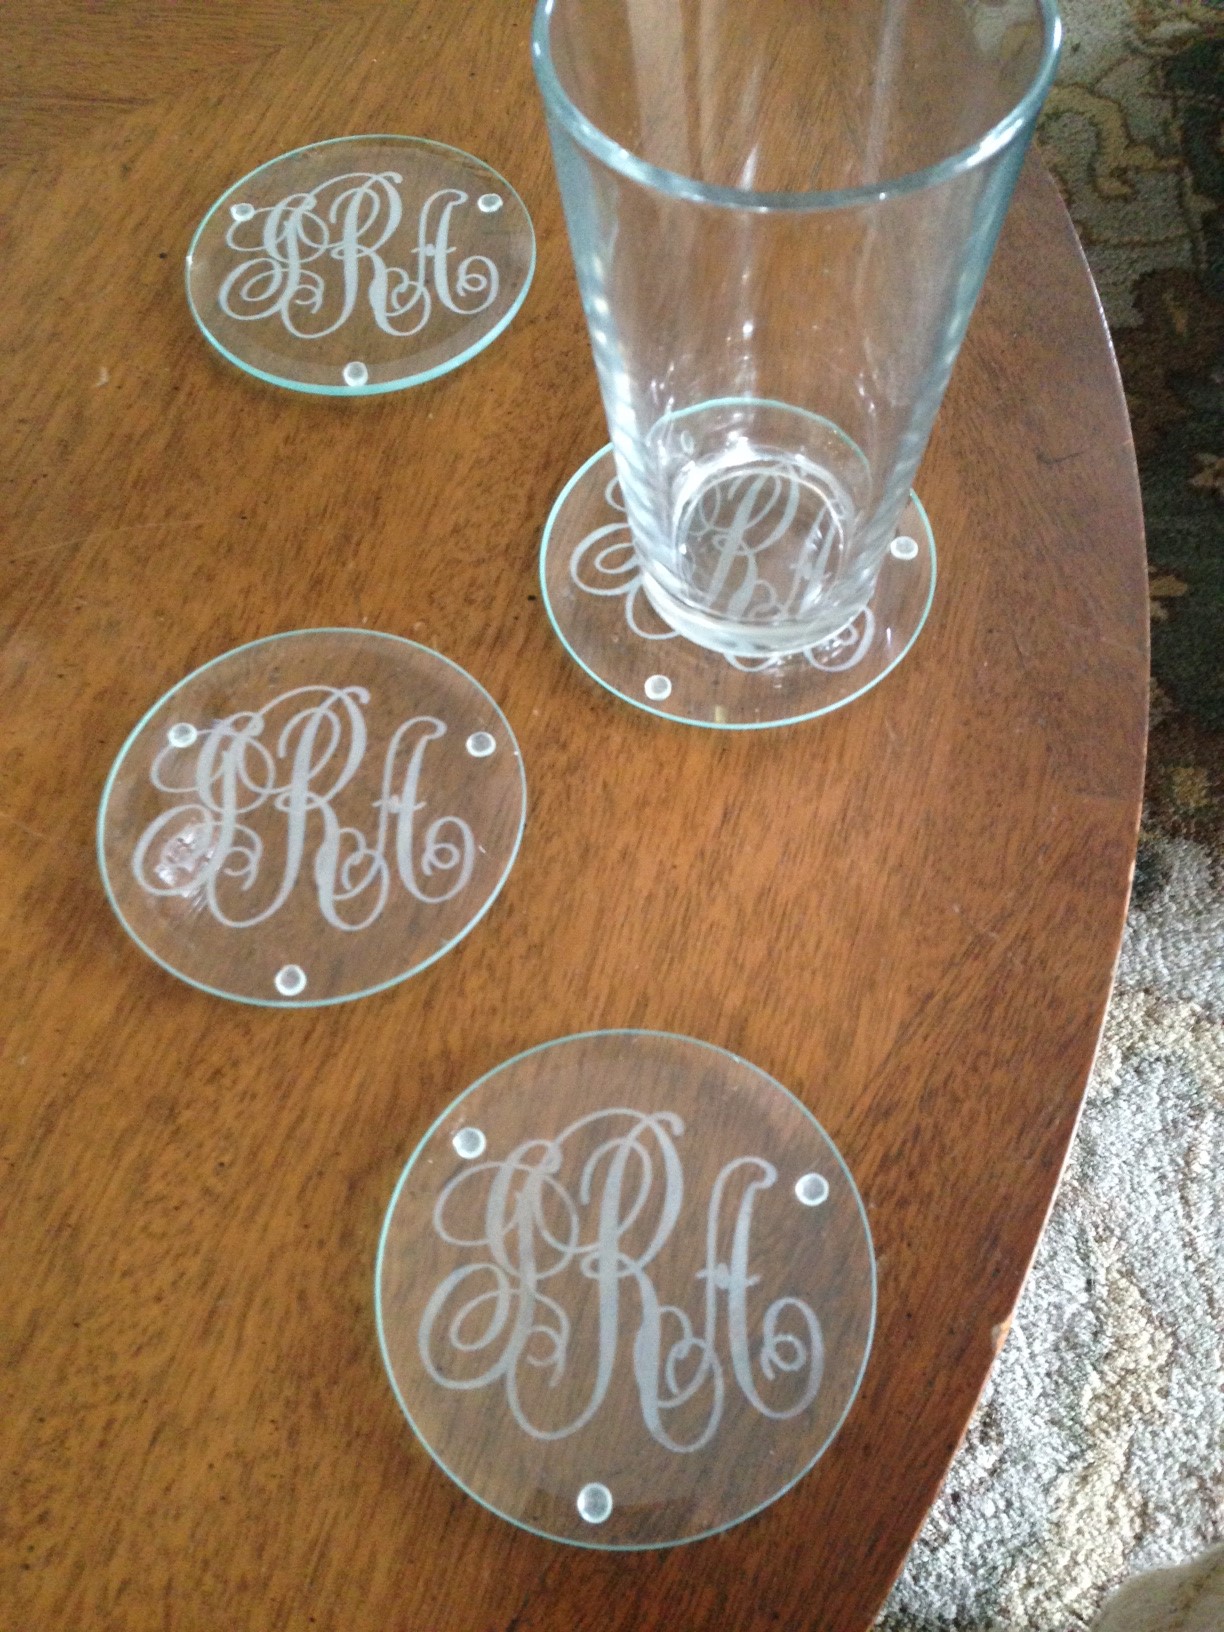 Pair bridal registry gifts with personalized gifts